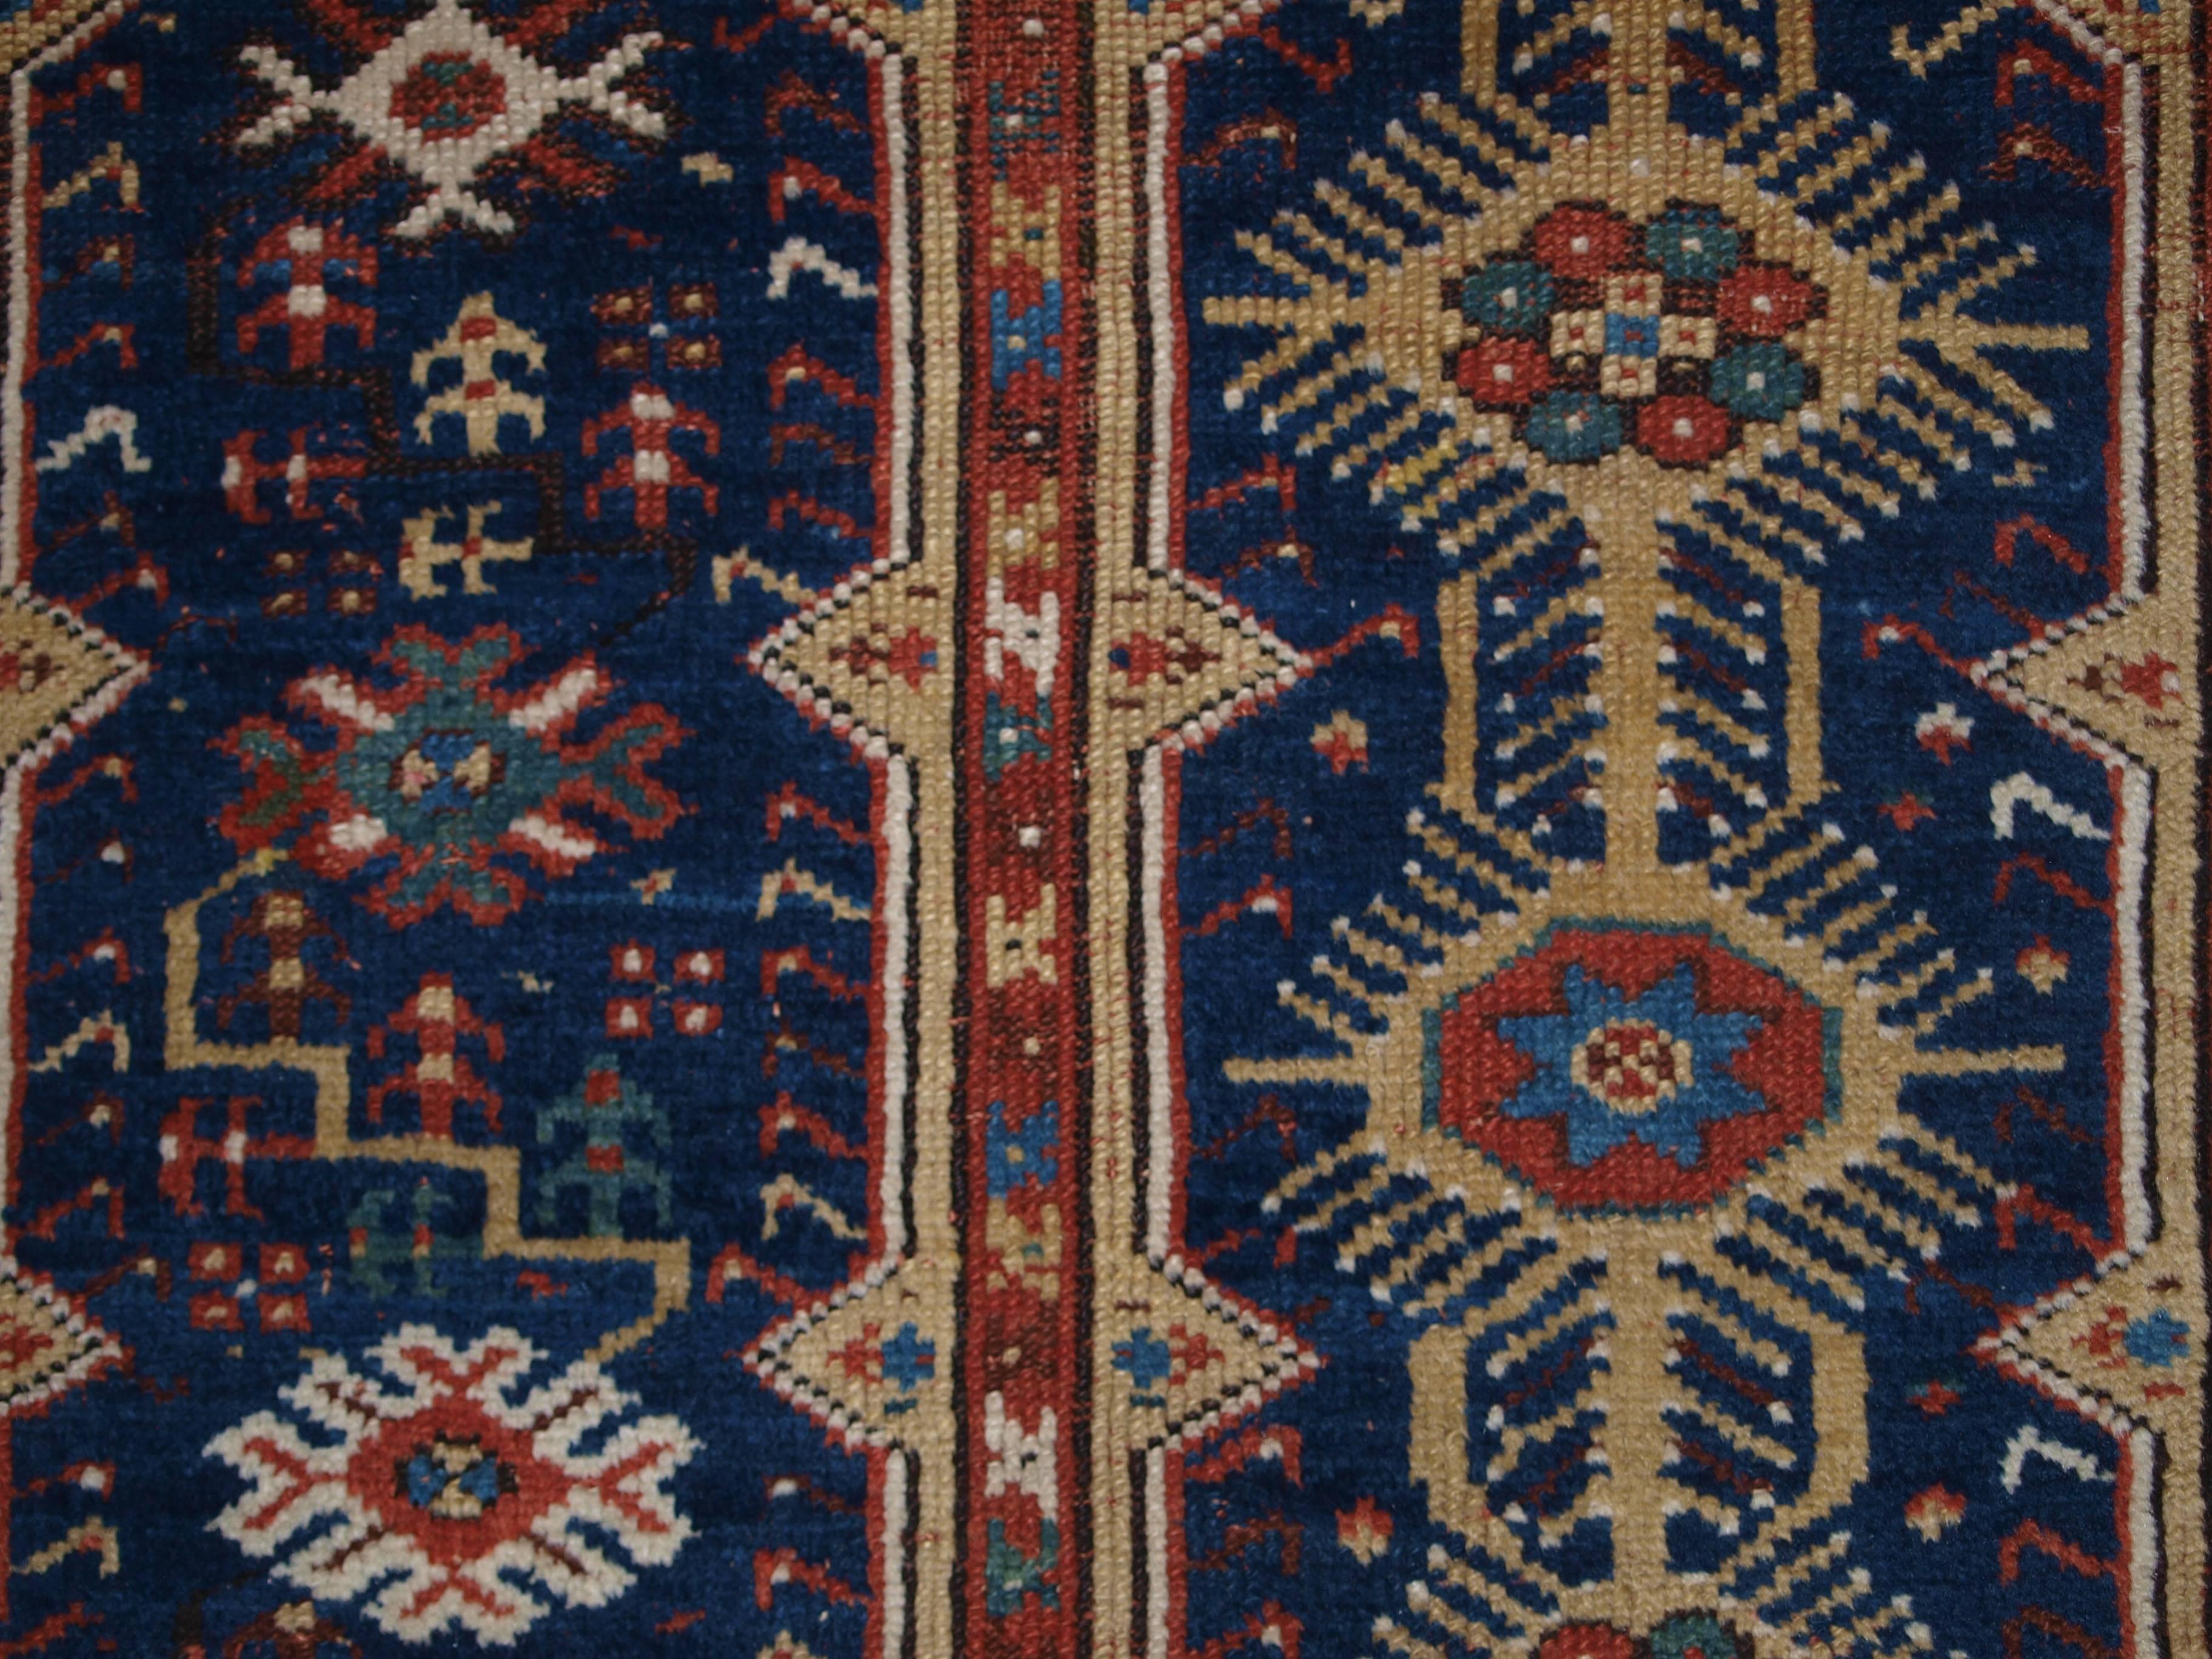 Antique Turkish Megri Prayer Rug with Yellow Field, Mid-19th Century For Sale 5